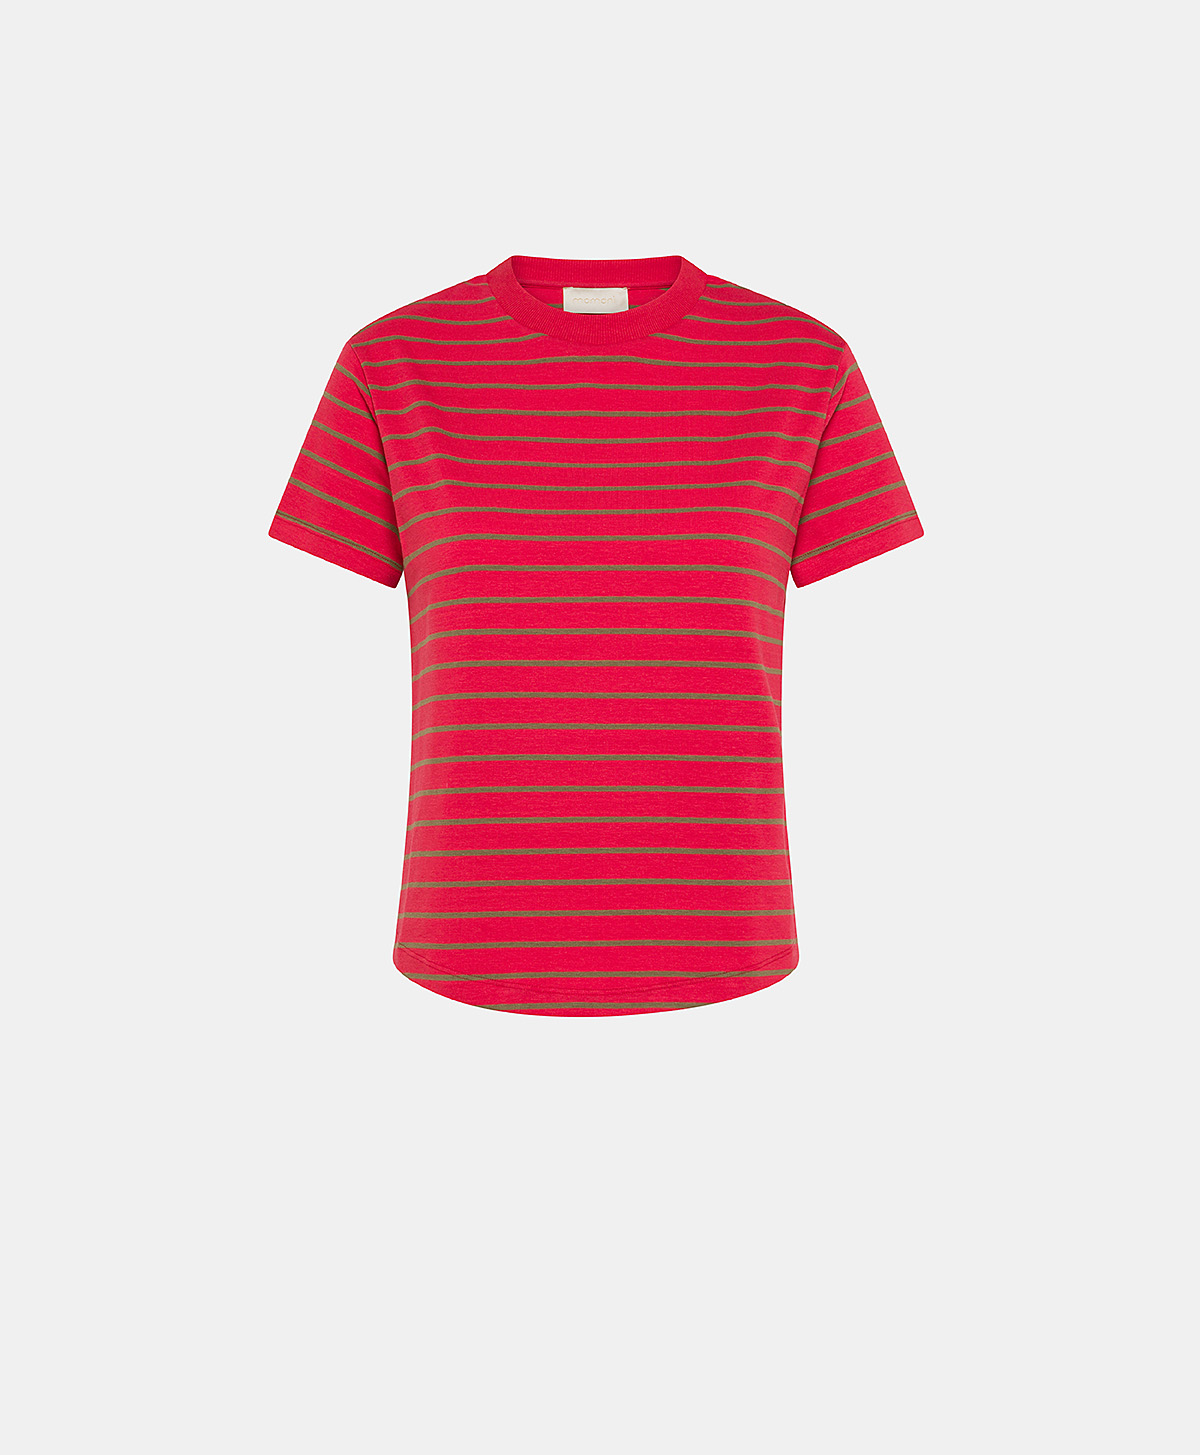 TSHIRT LOTTIE IN JERSEY A RIGHINE - ROSSO/TABACCO - Momonì